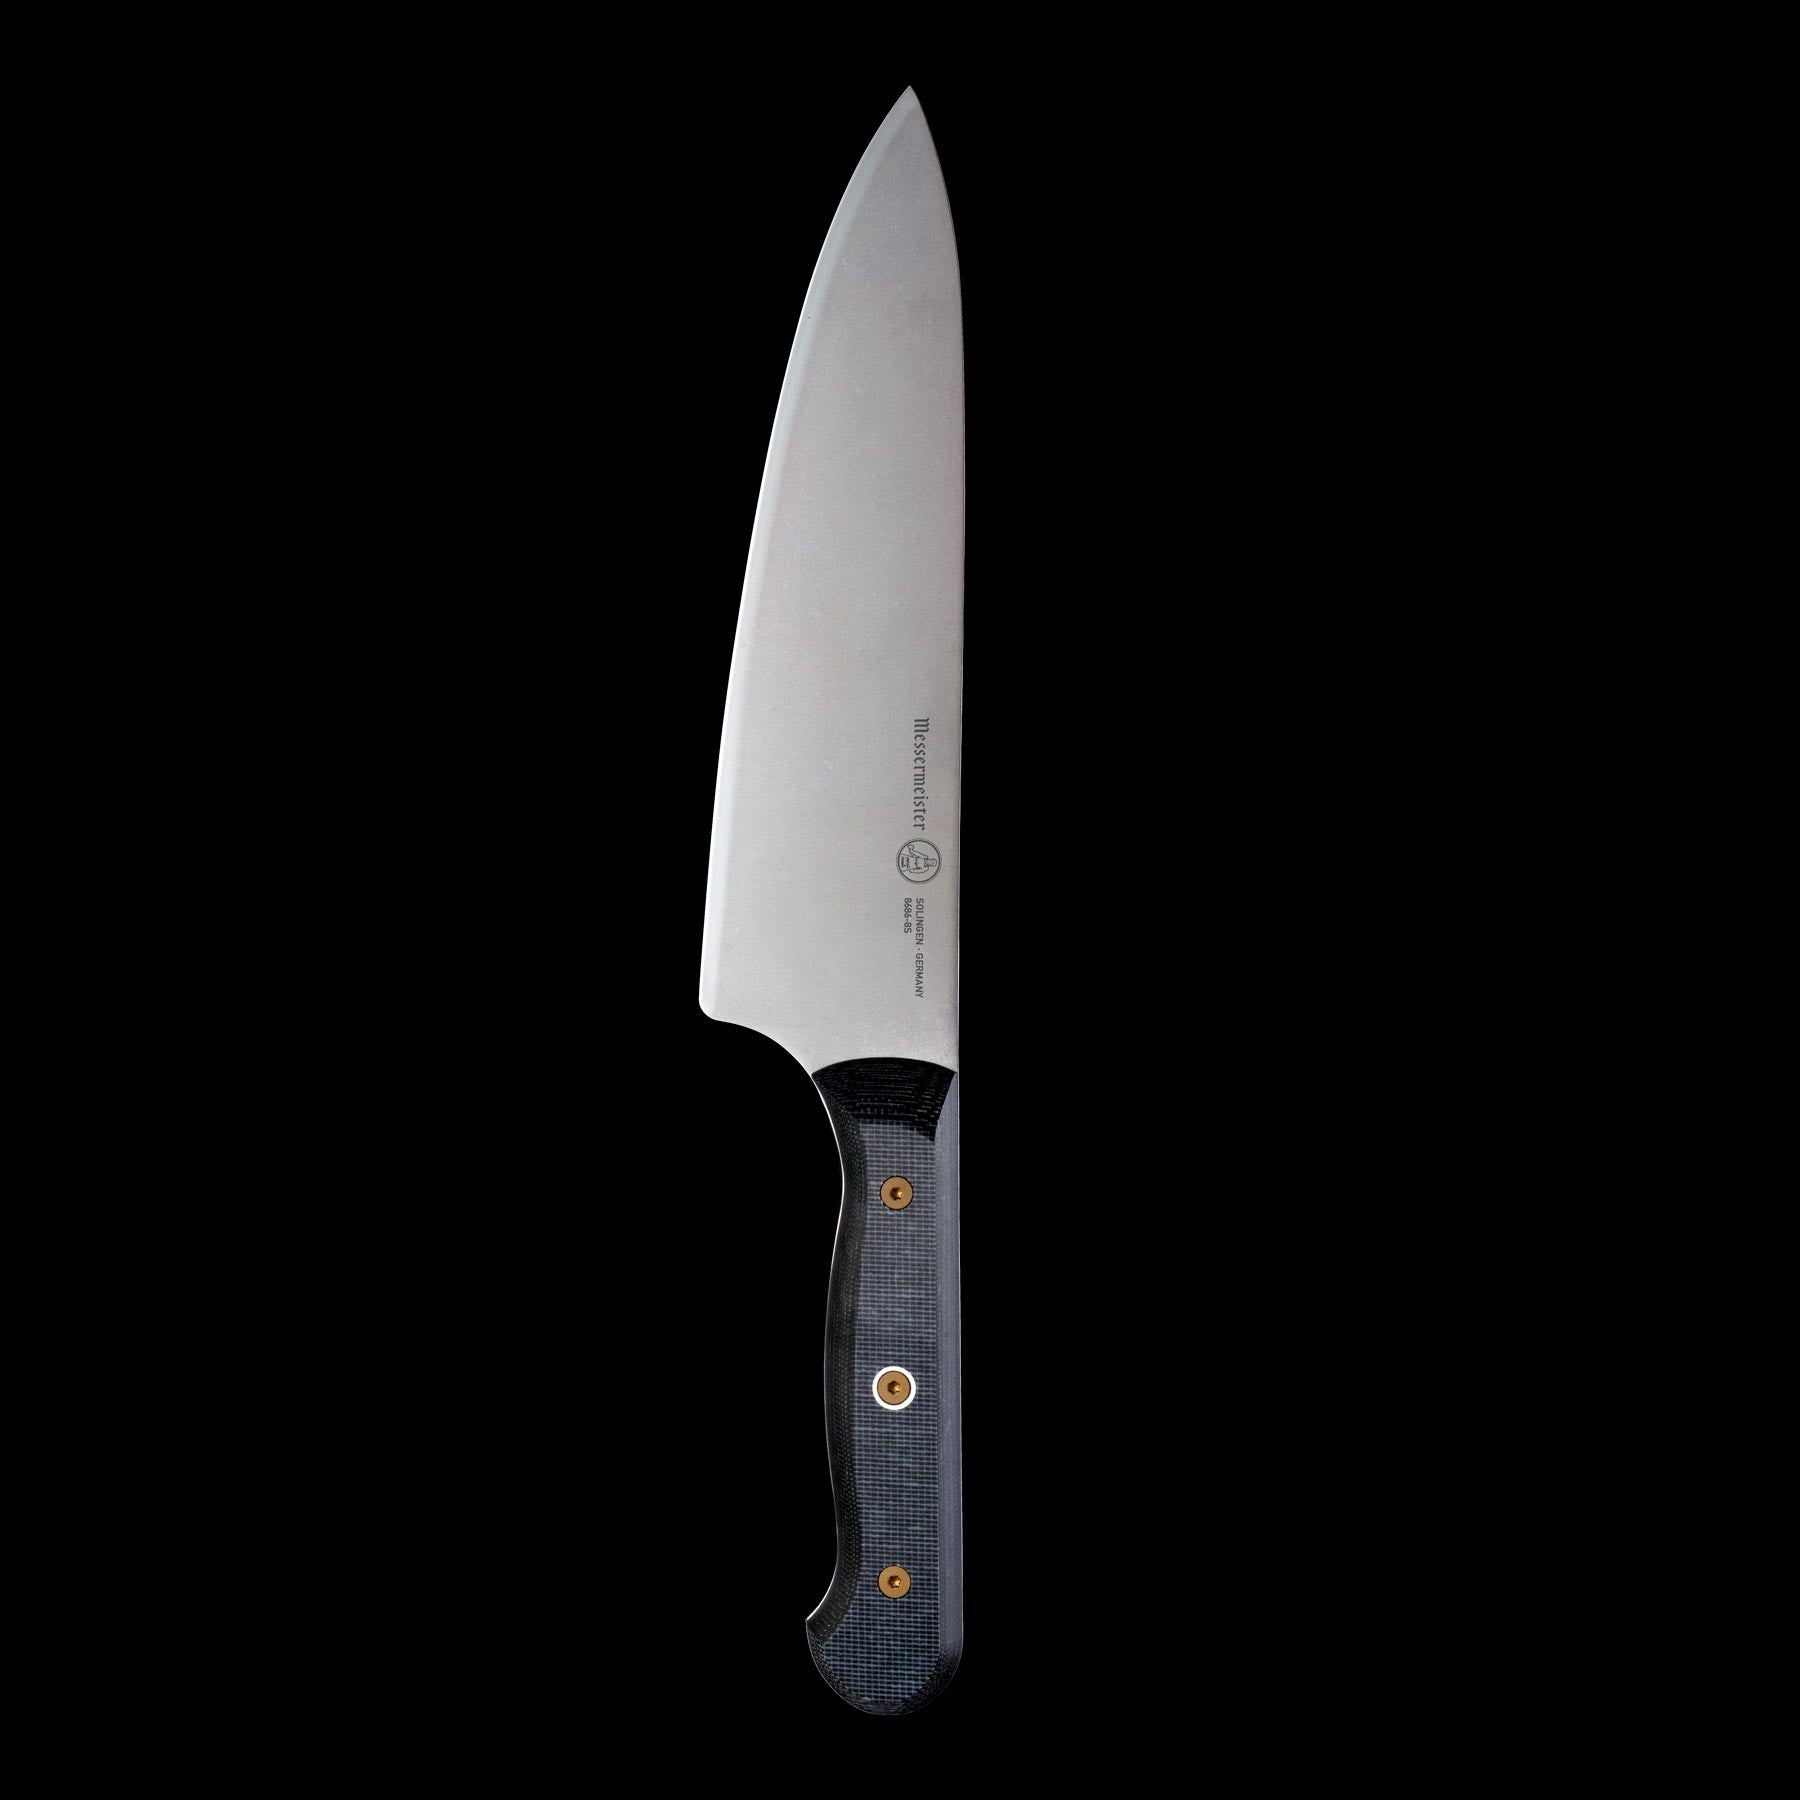 8 inch Chef KnifePrecision Forged High-Carbon Stainless Steel German Made Chefs Knife ,Black